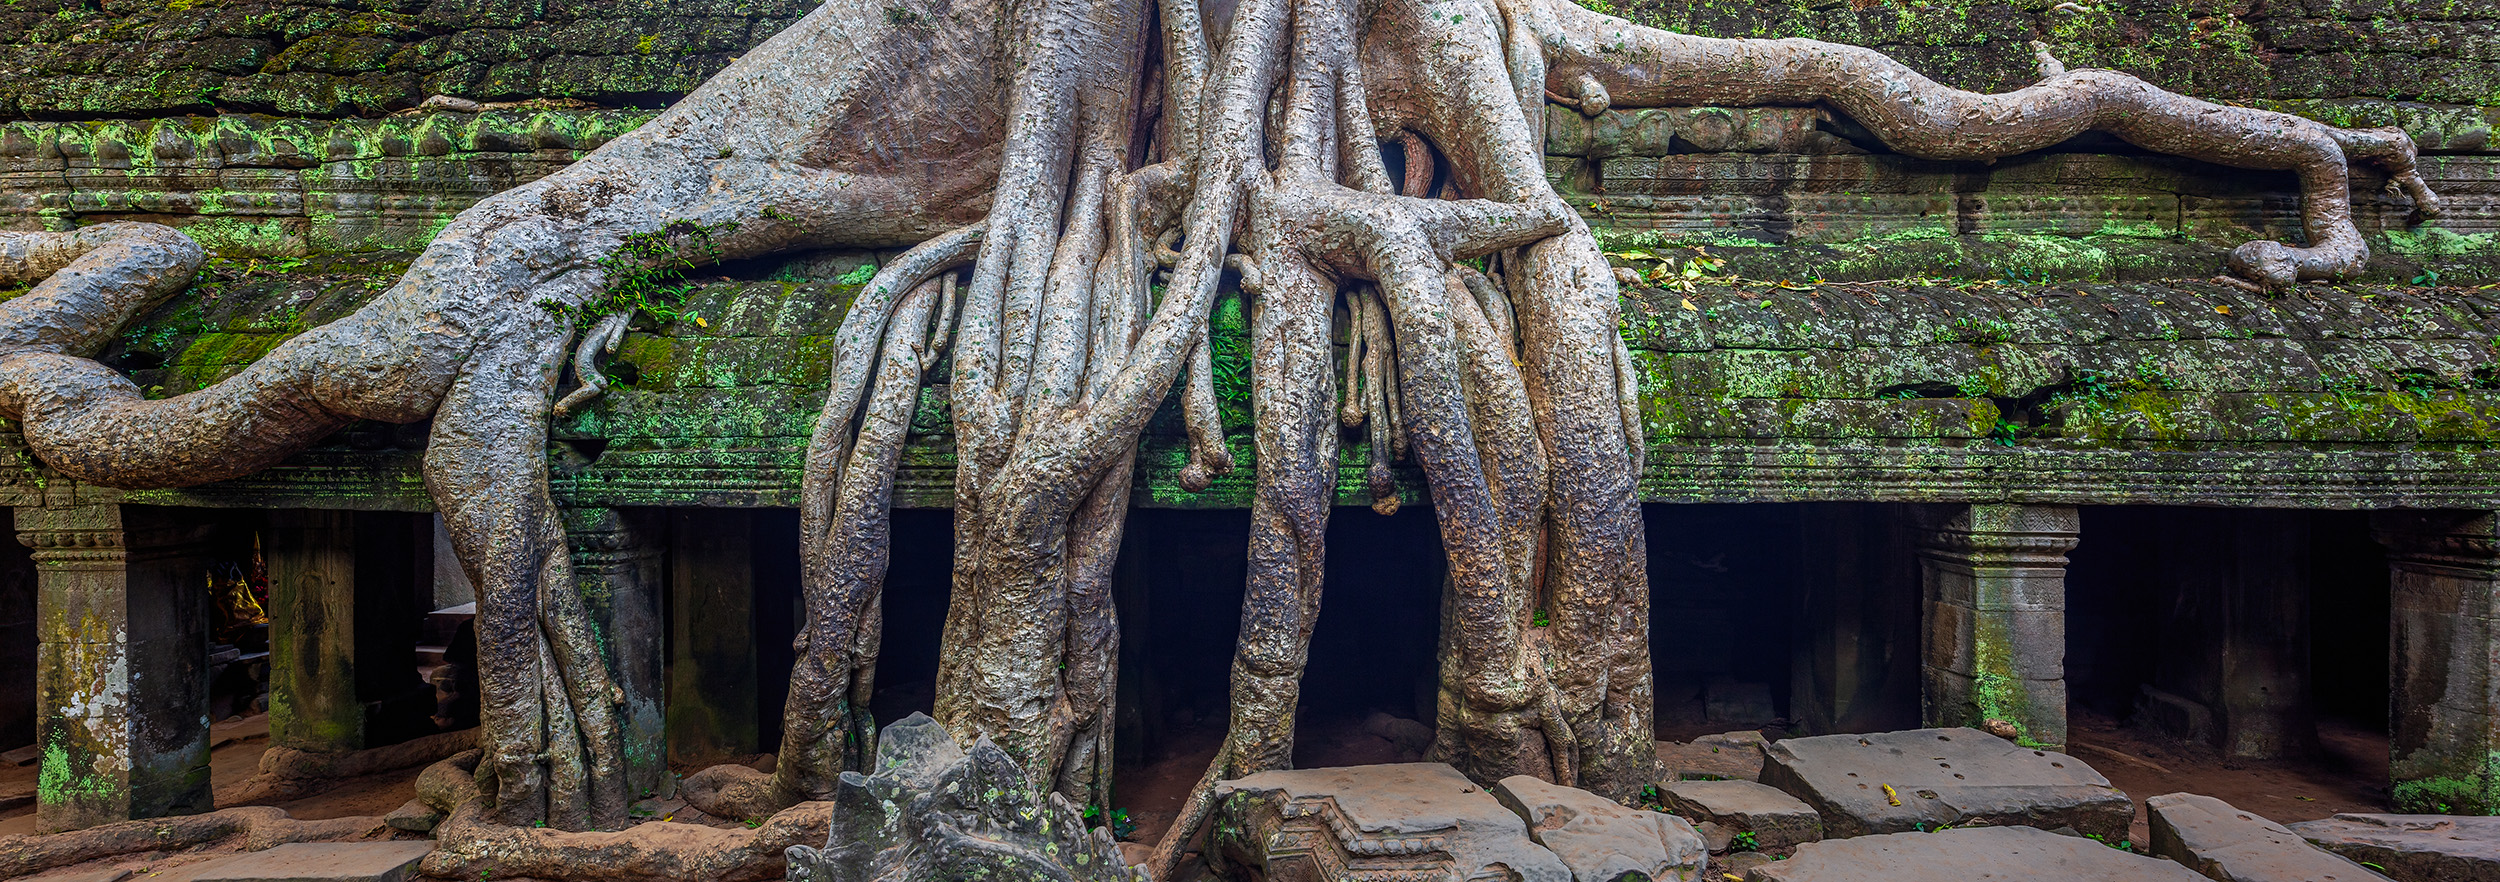 In the heart of Ta Prohm's ancient stone temple complex in Siem Reap, Cambodia, nature's relentless march takes center stage....